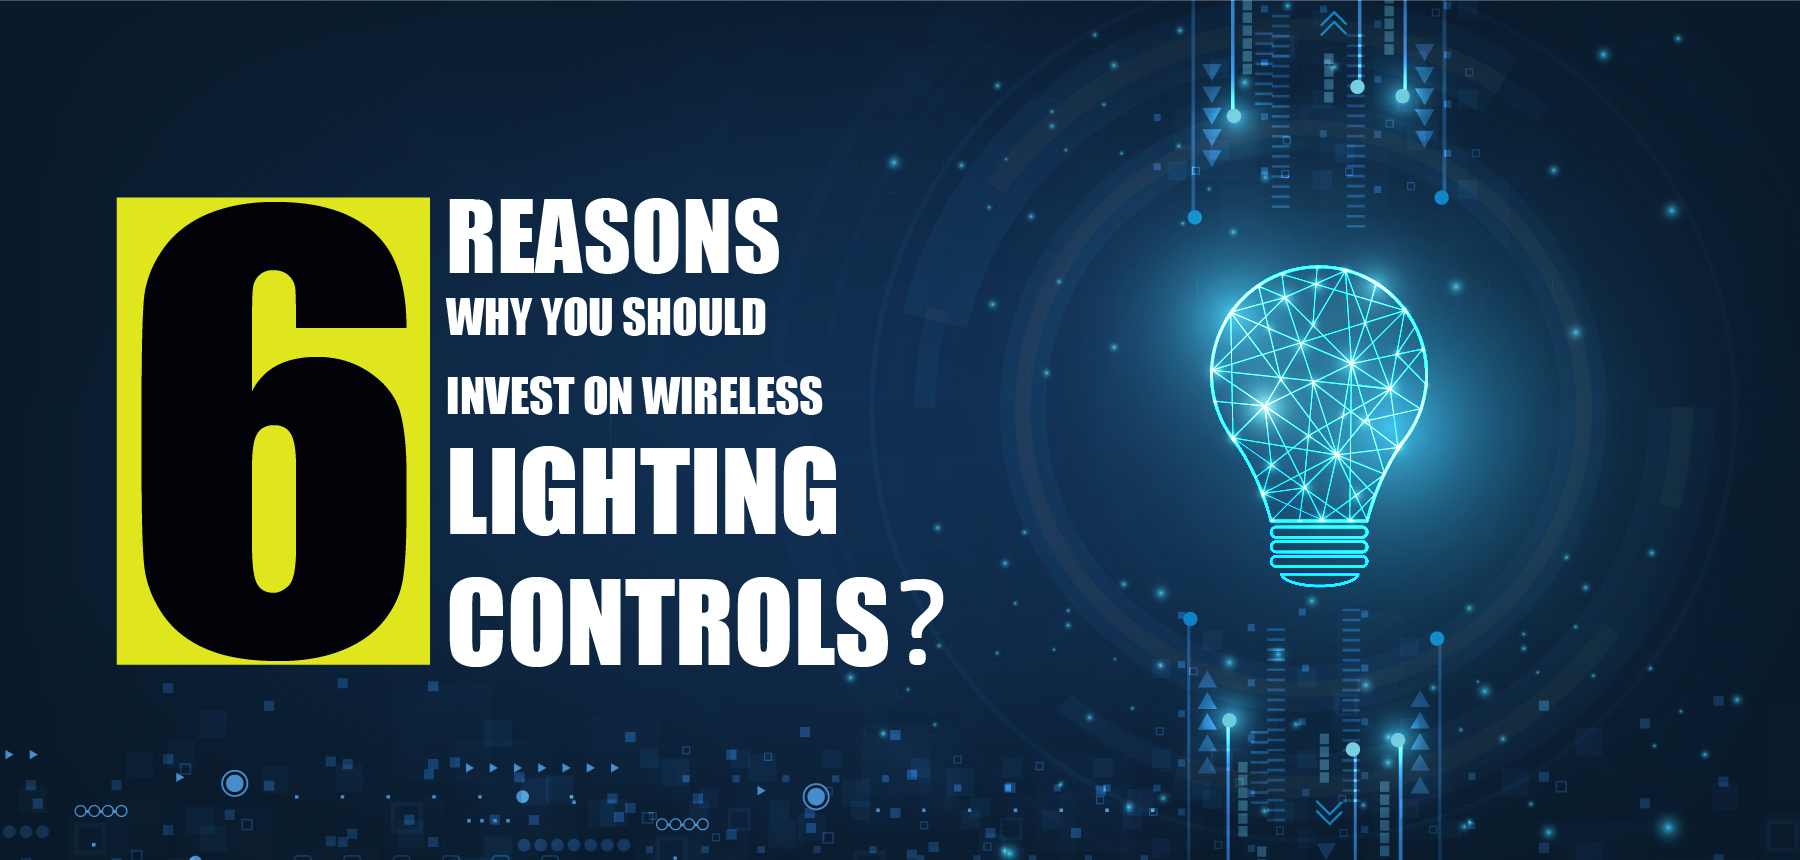 6 reason why you should invest on wireless lighting controls